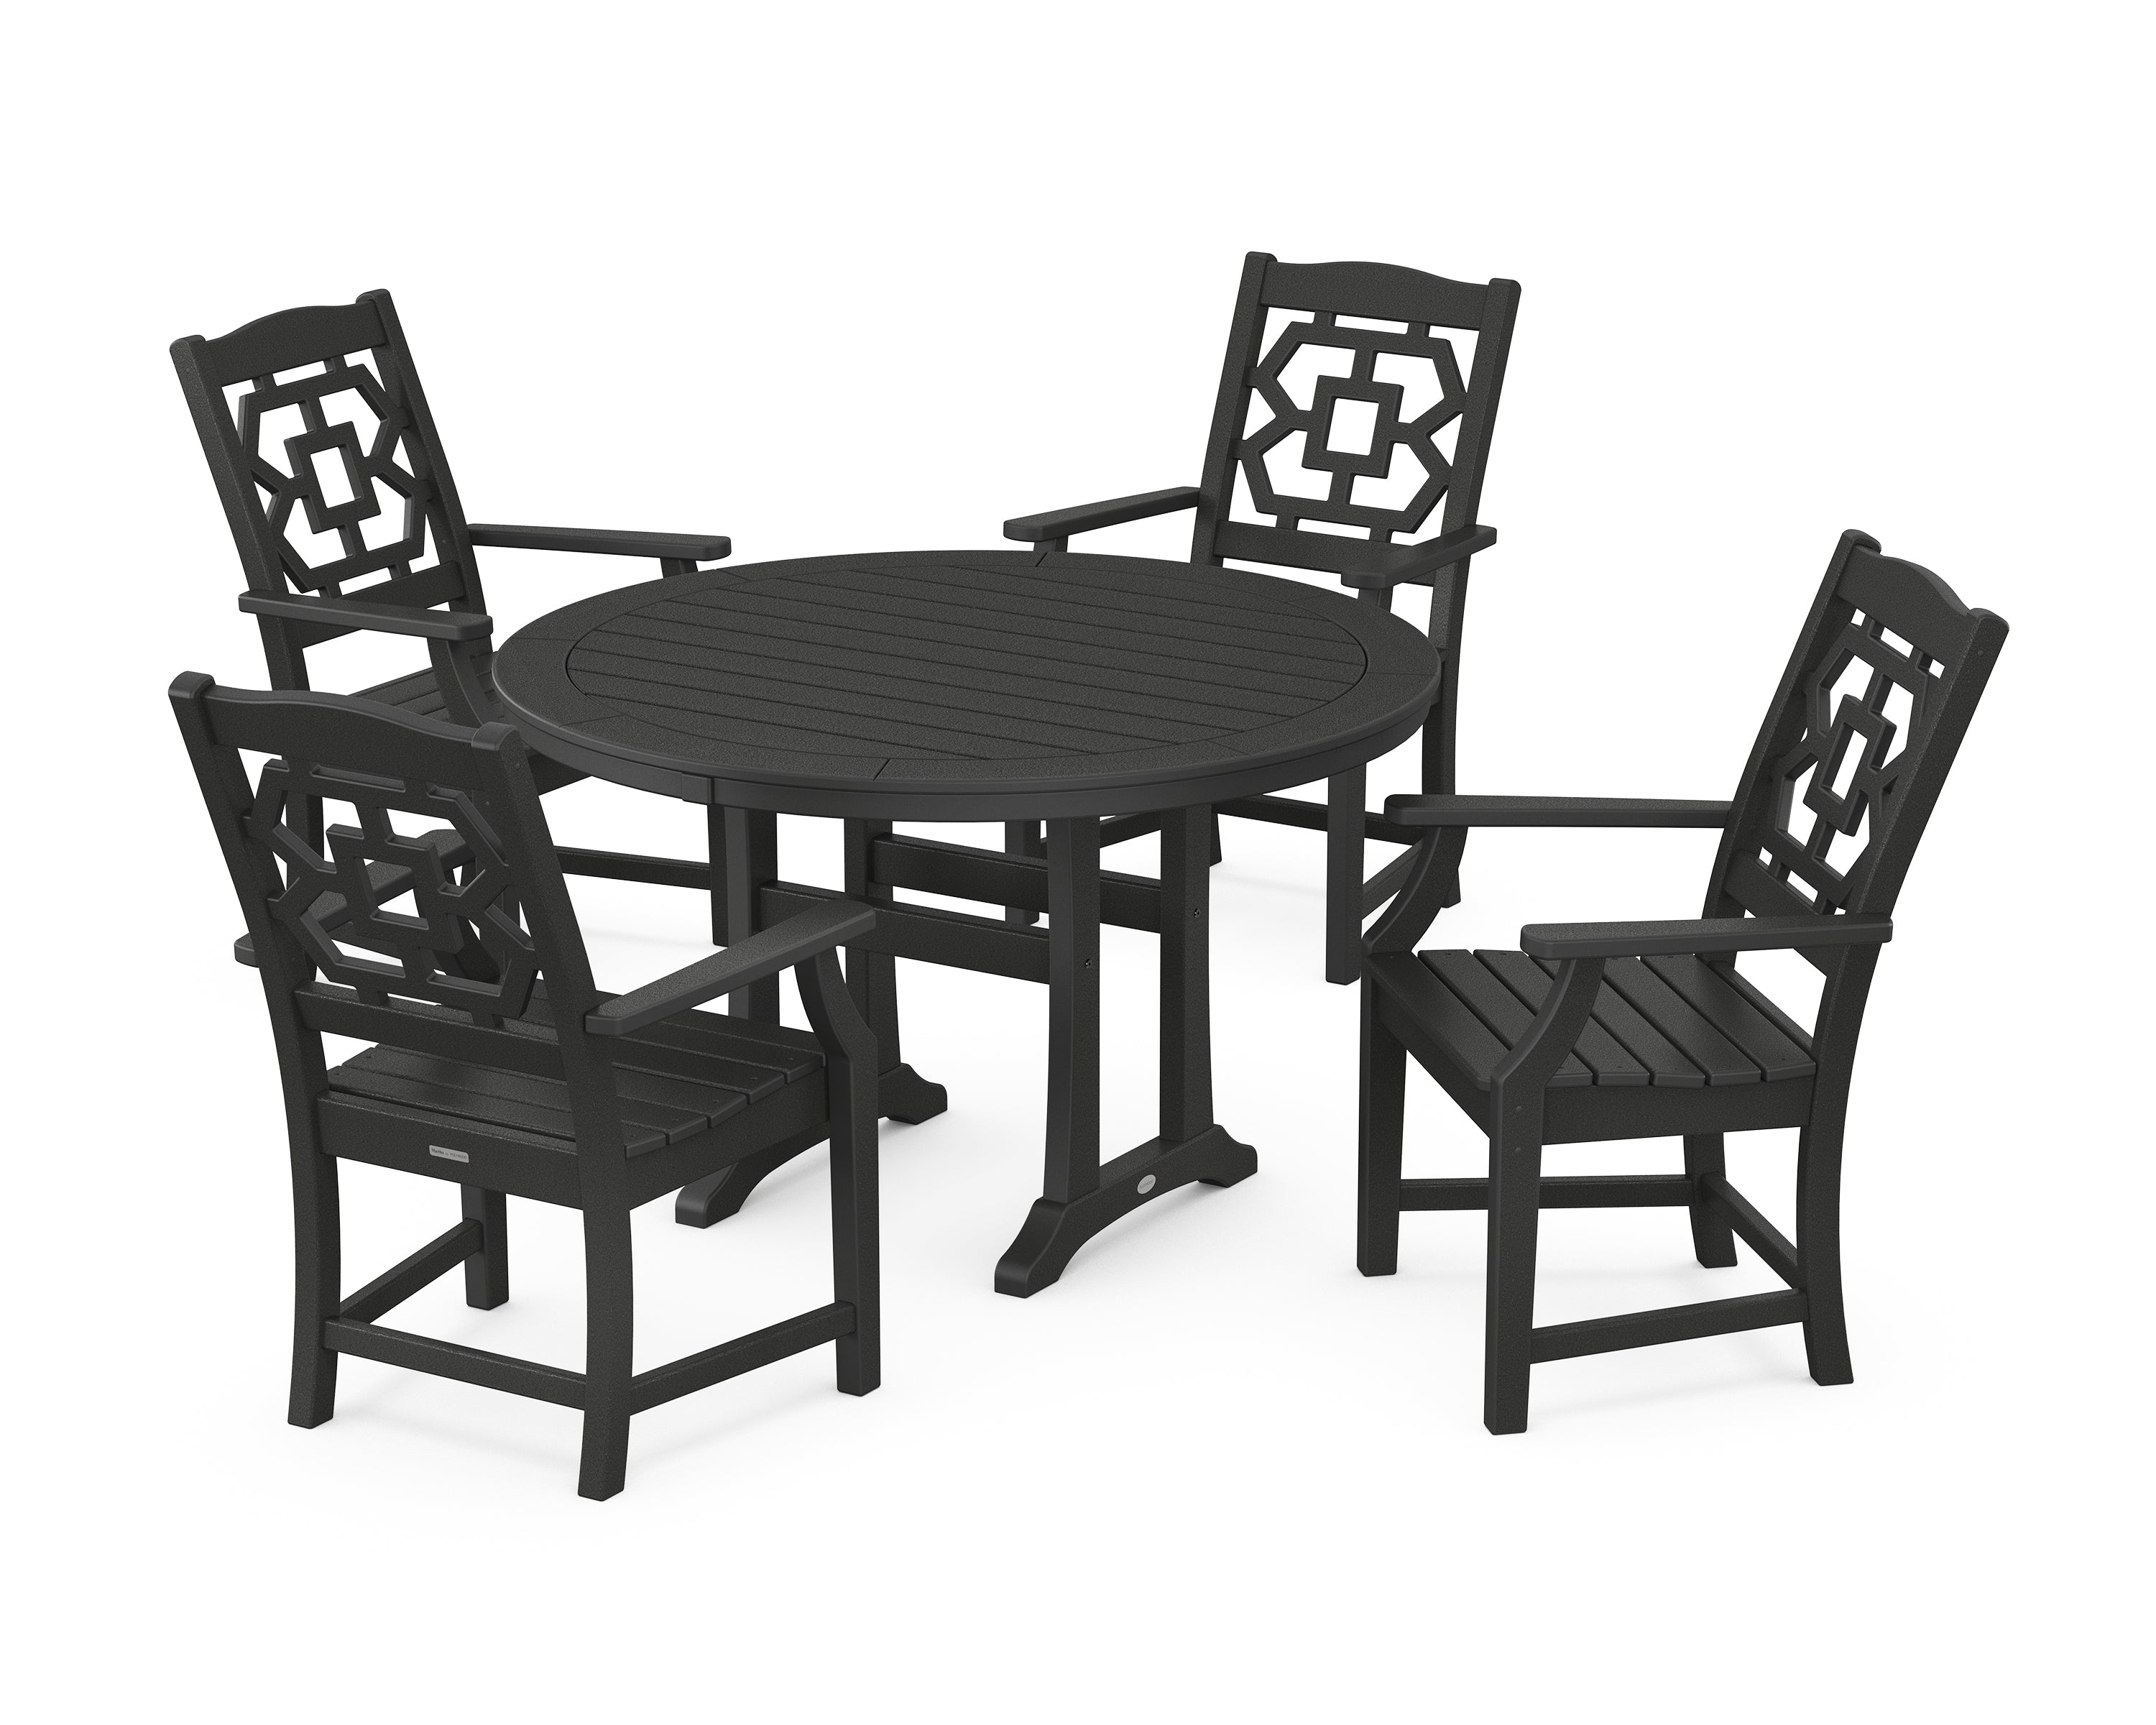 Martha Stewart by POLYWOOD® Chinoiserie 5-Piece Round Dining Set with Trestle Legs in Black